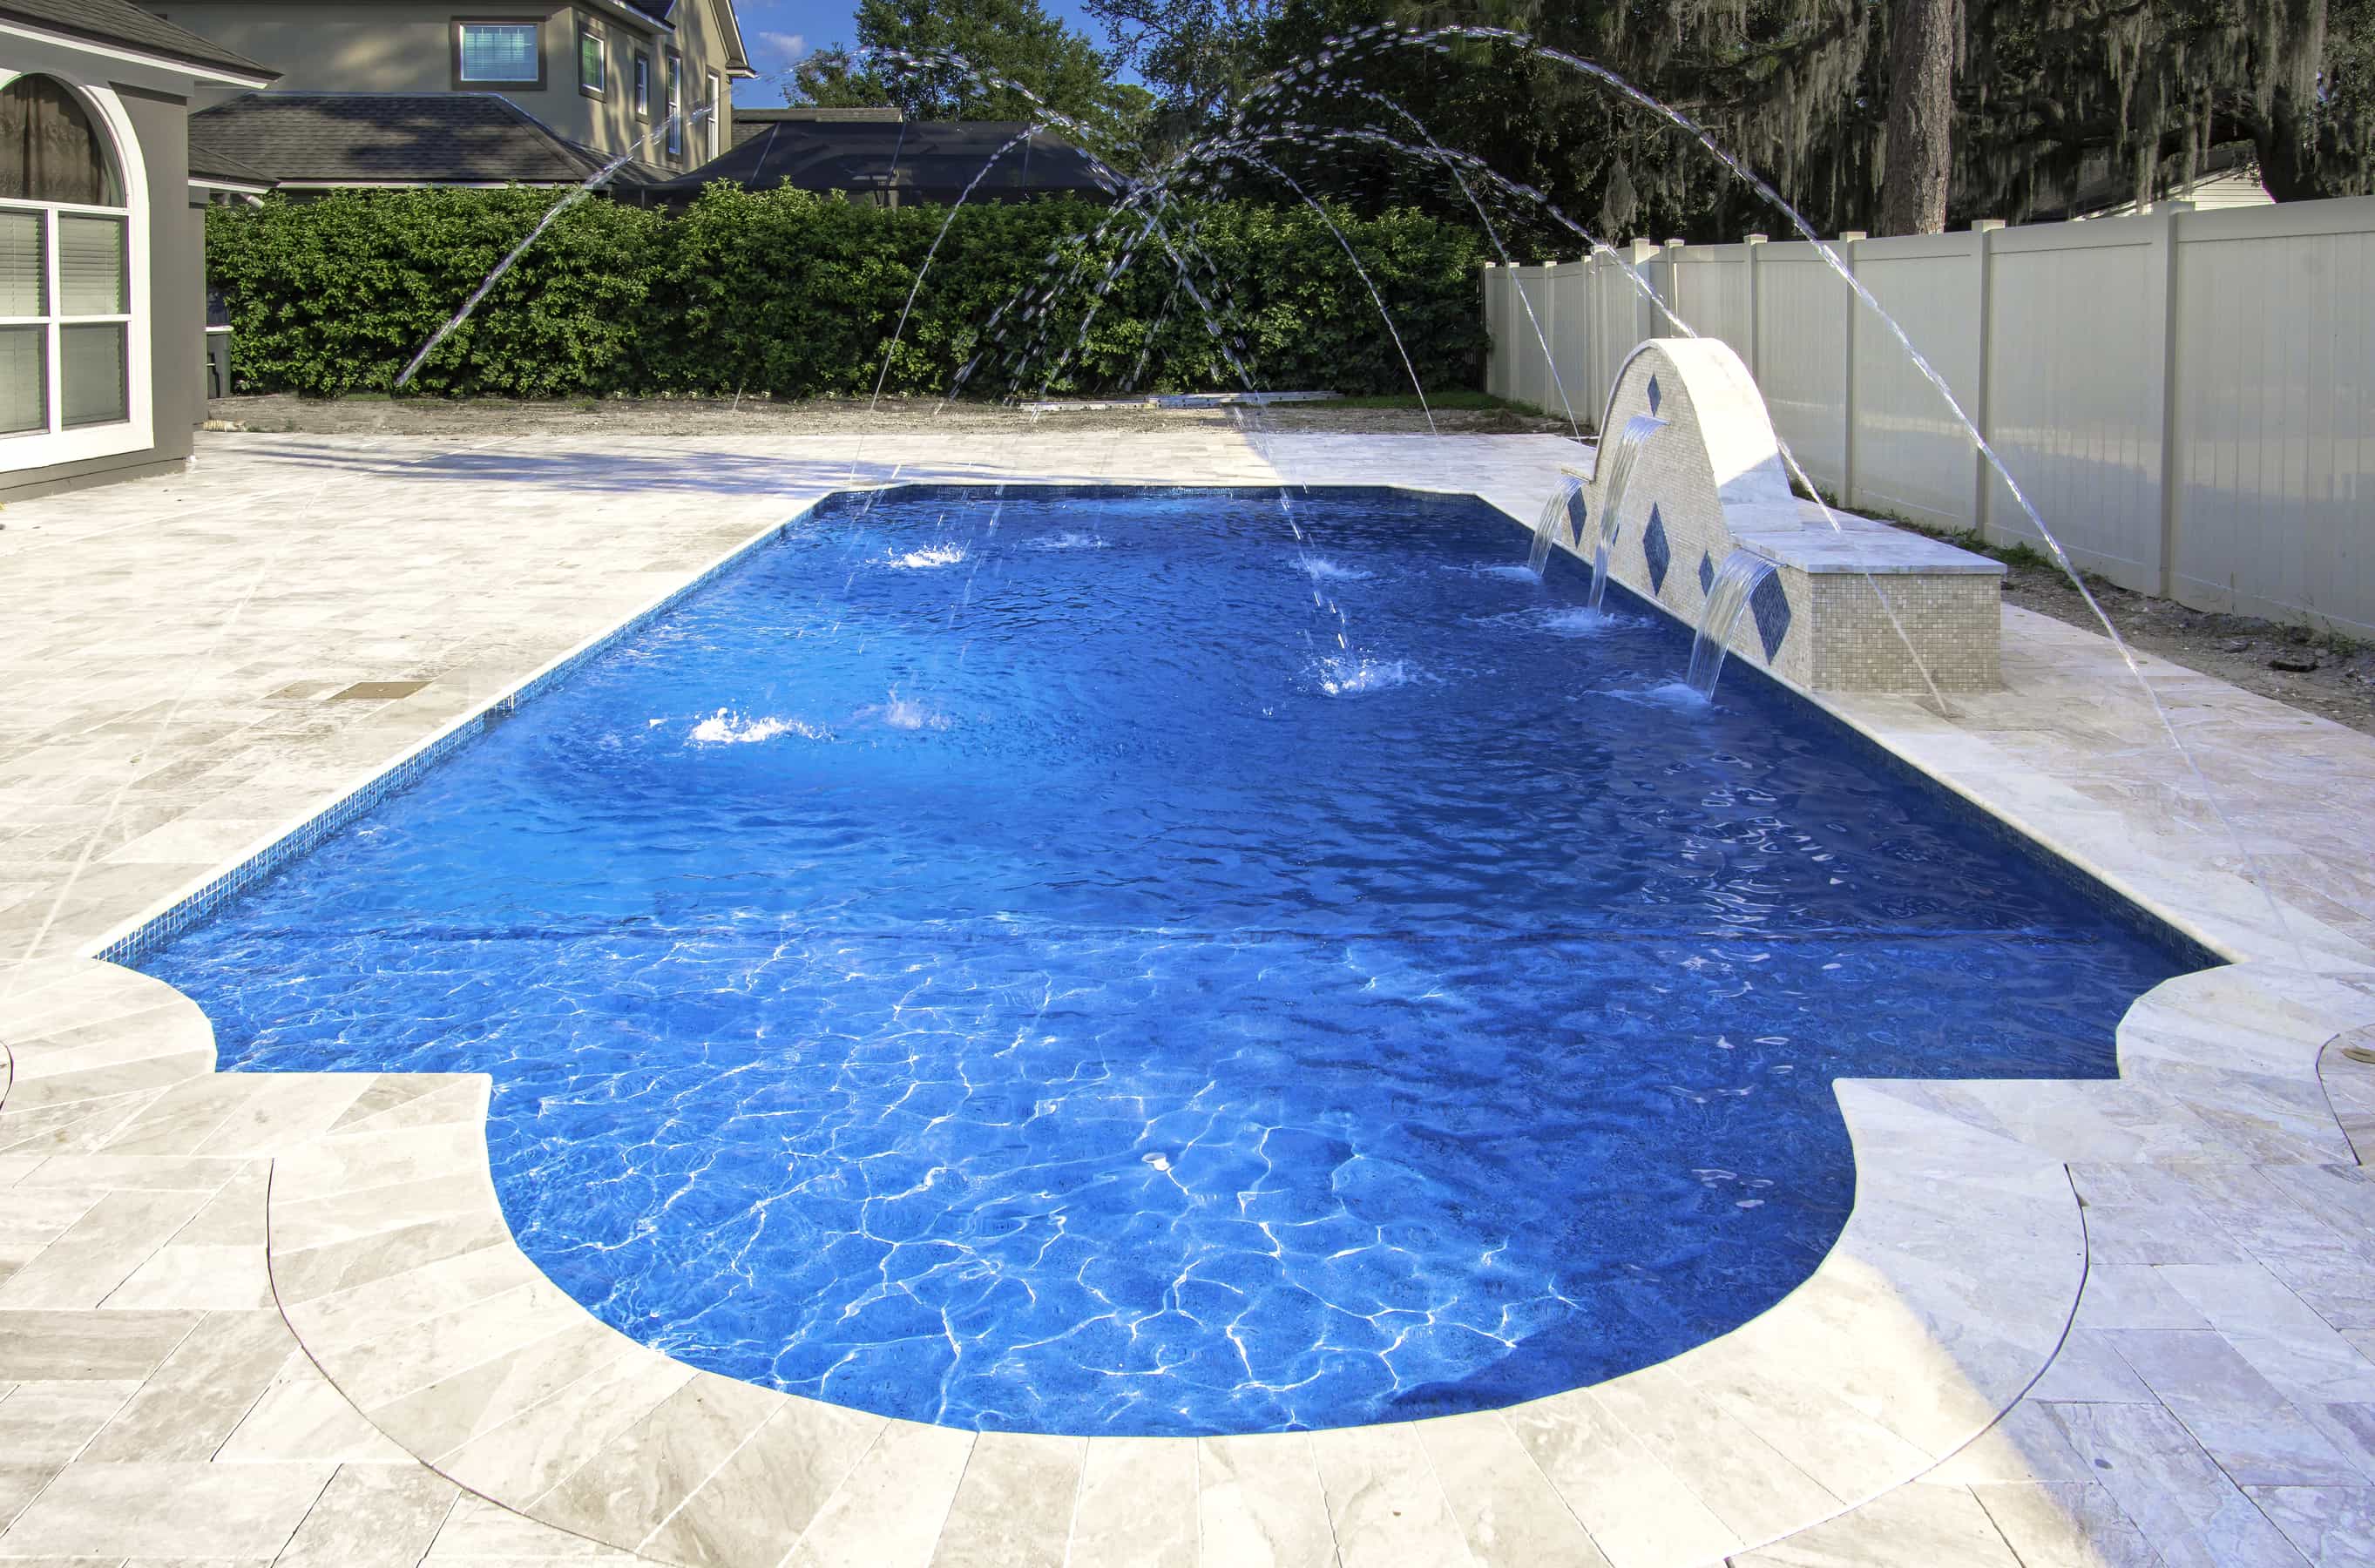 Luxury bright blue pool in the backyard of a home with beautiful tiles. Waterfall pouring water.